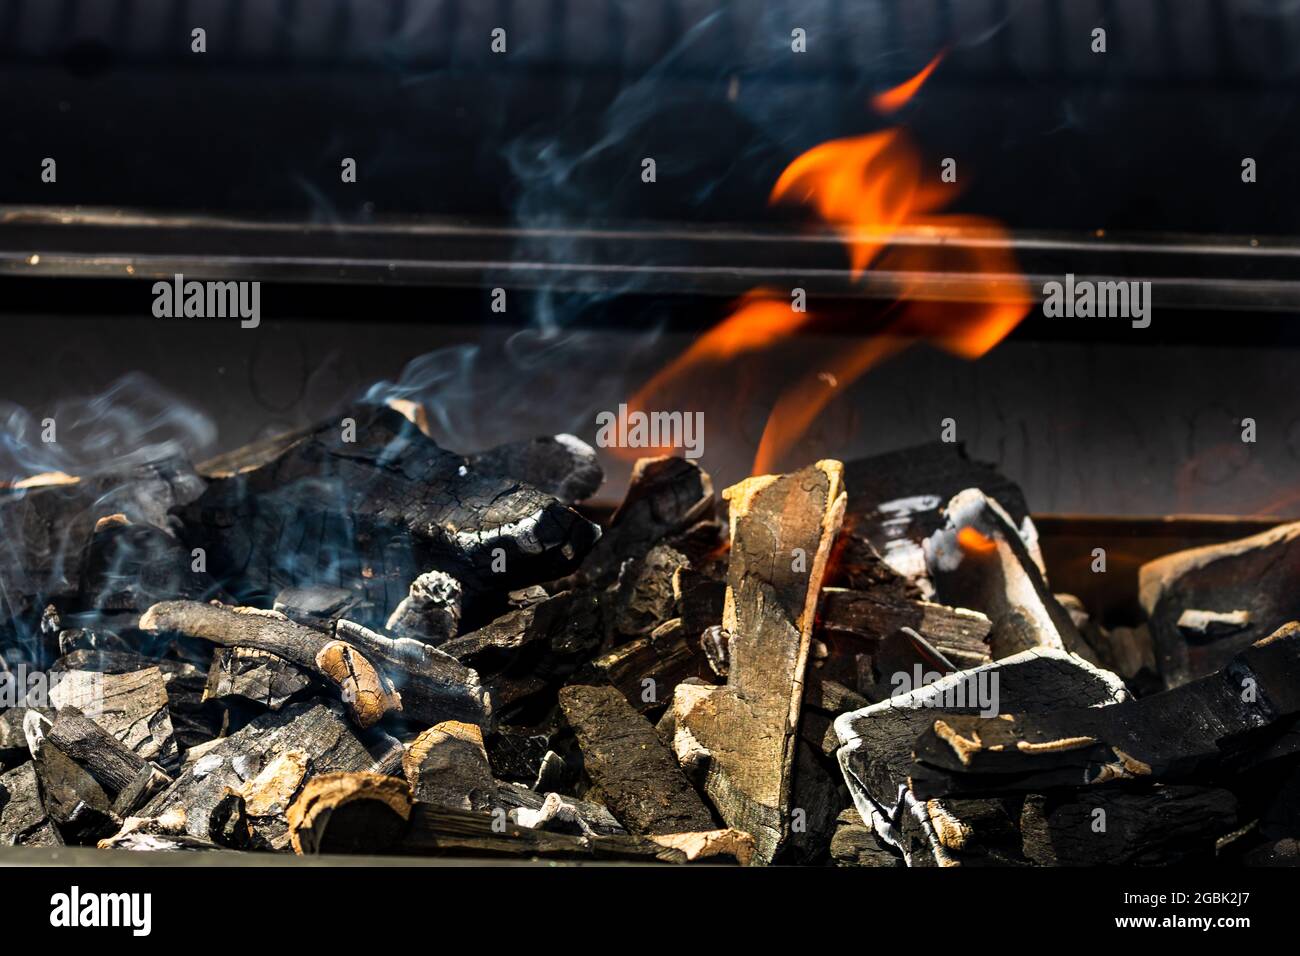 Barbecue grill pit with glowing Stock Photo